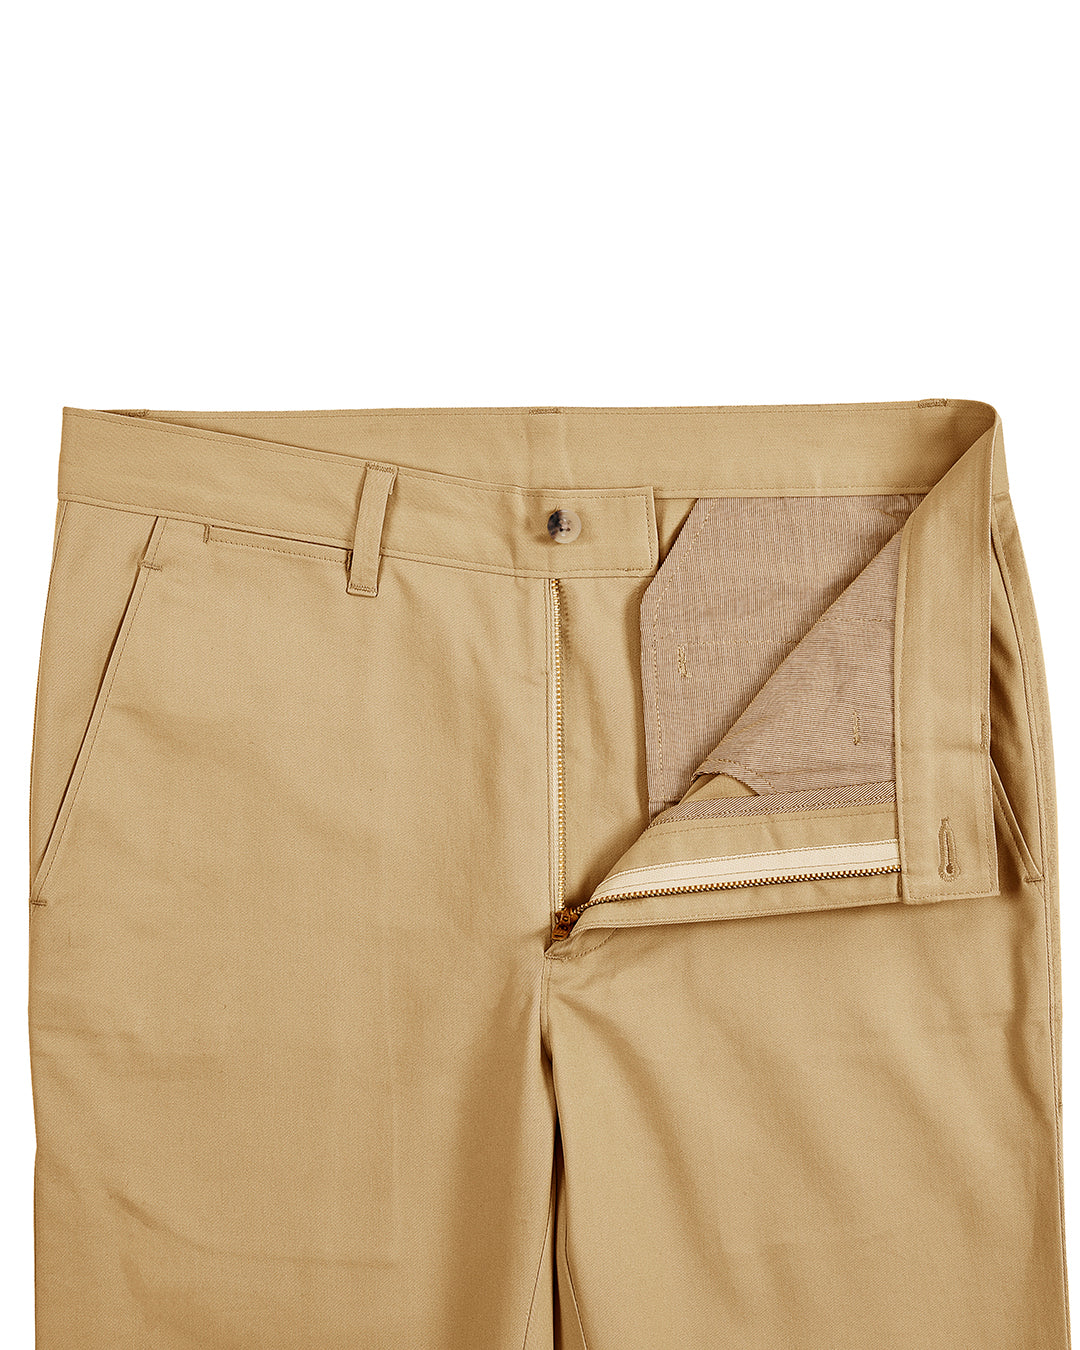 Open front view of custom Genoa Chino pants for men by Luxire in golden corn